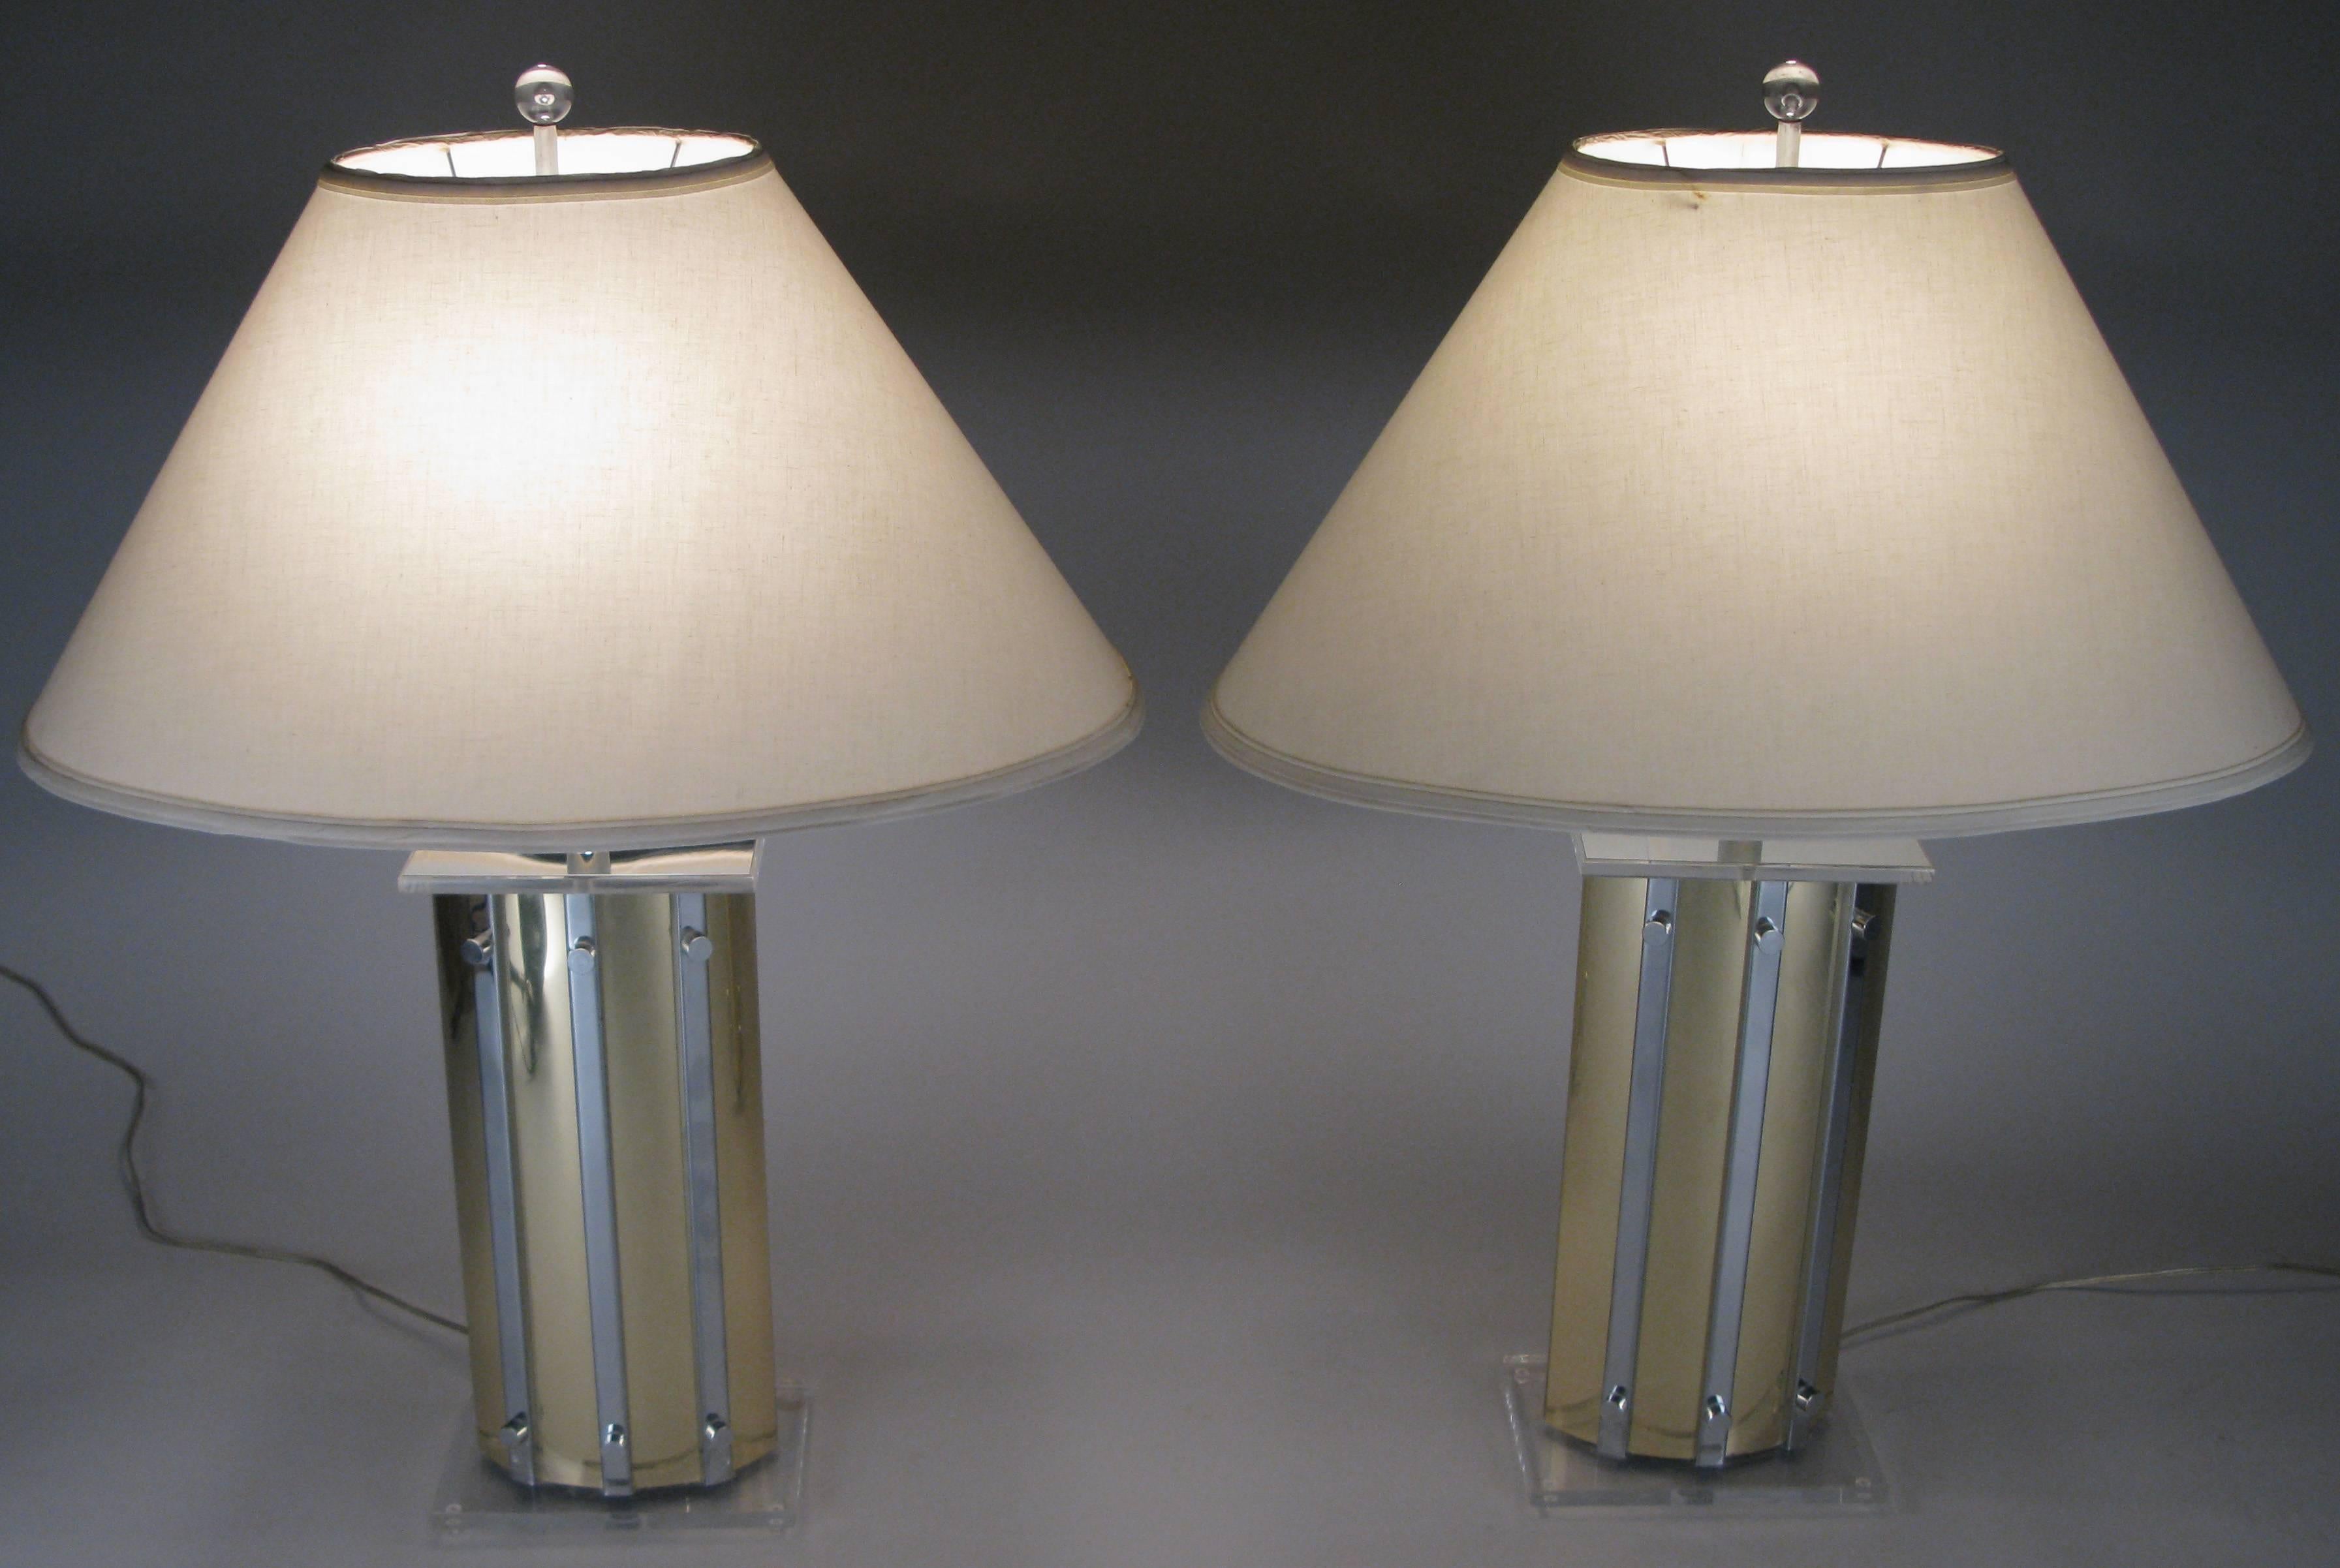 A very stylish pair of vintage 1970s oval table lamps in brass with chrome accent panels, and Lucite bases. Great design in excellent condition with their original oval shades.